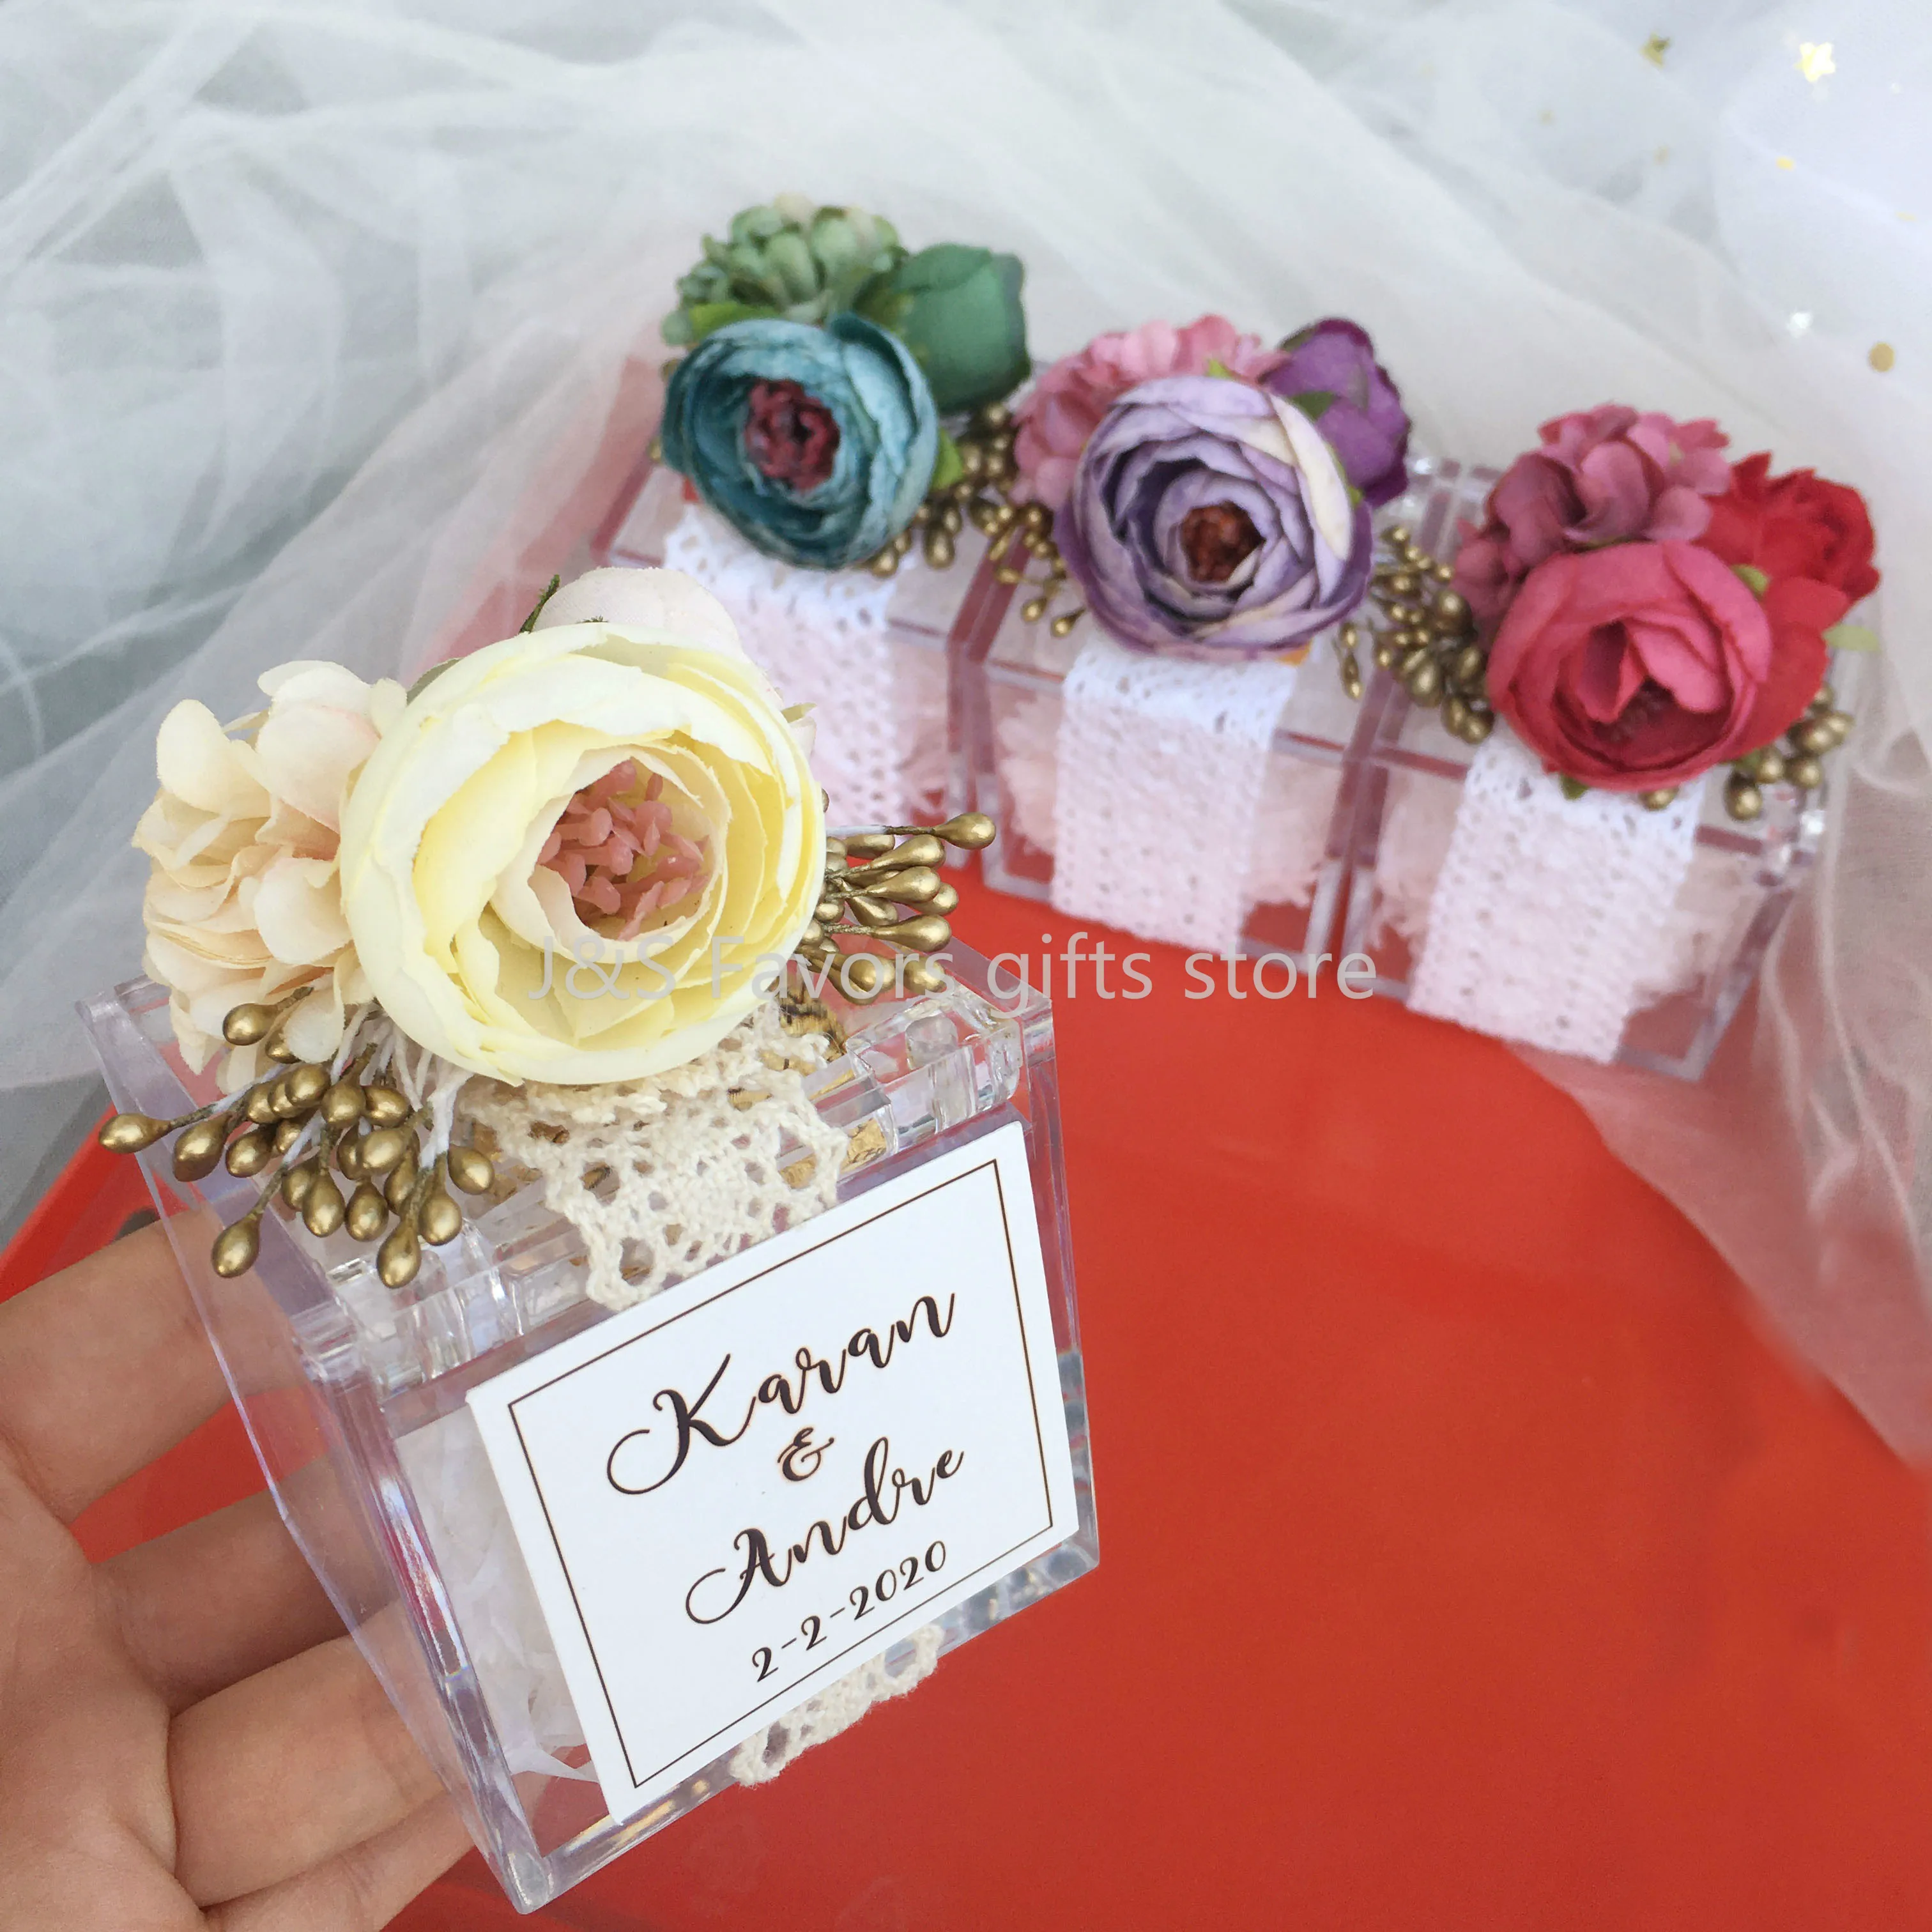 Mini Dried Flower Bouquet Bridesmaid Favor Flower Favors Gift Wedding Favor Magnet Personalized Wedding Favors for Guests Gifts .